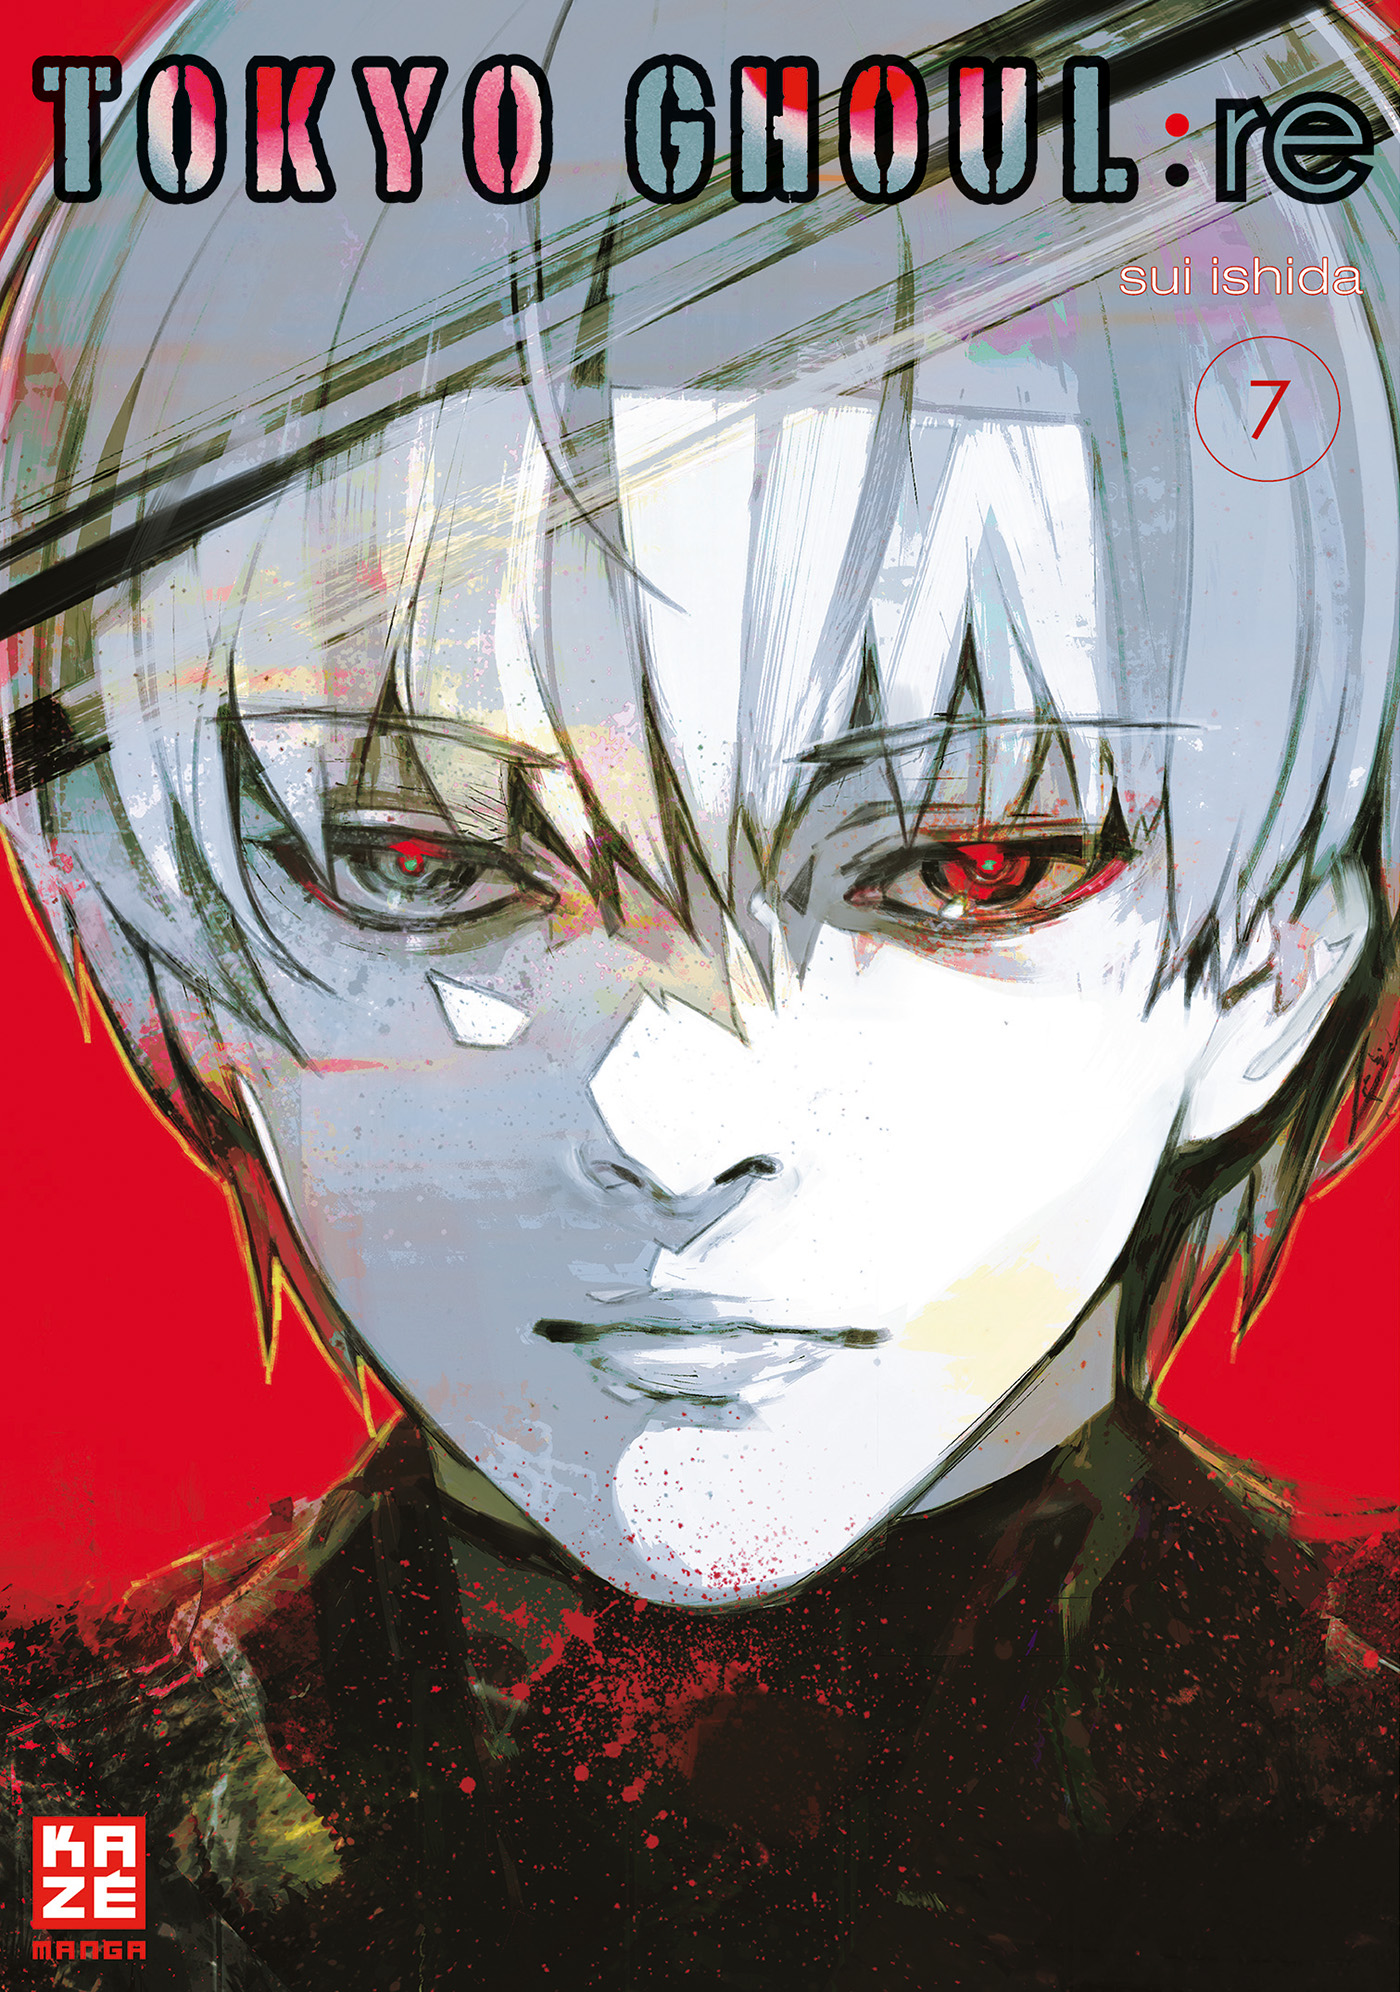 - Band 7 Tokyo Ghoul:re